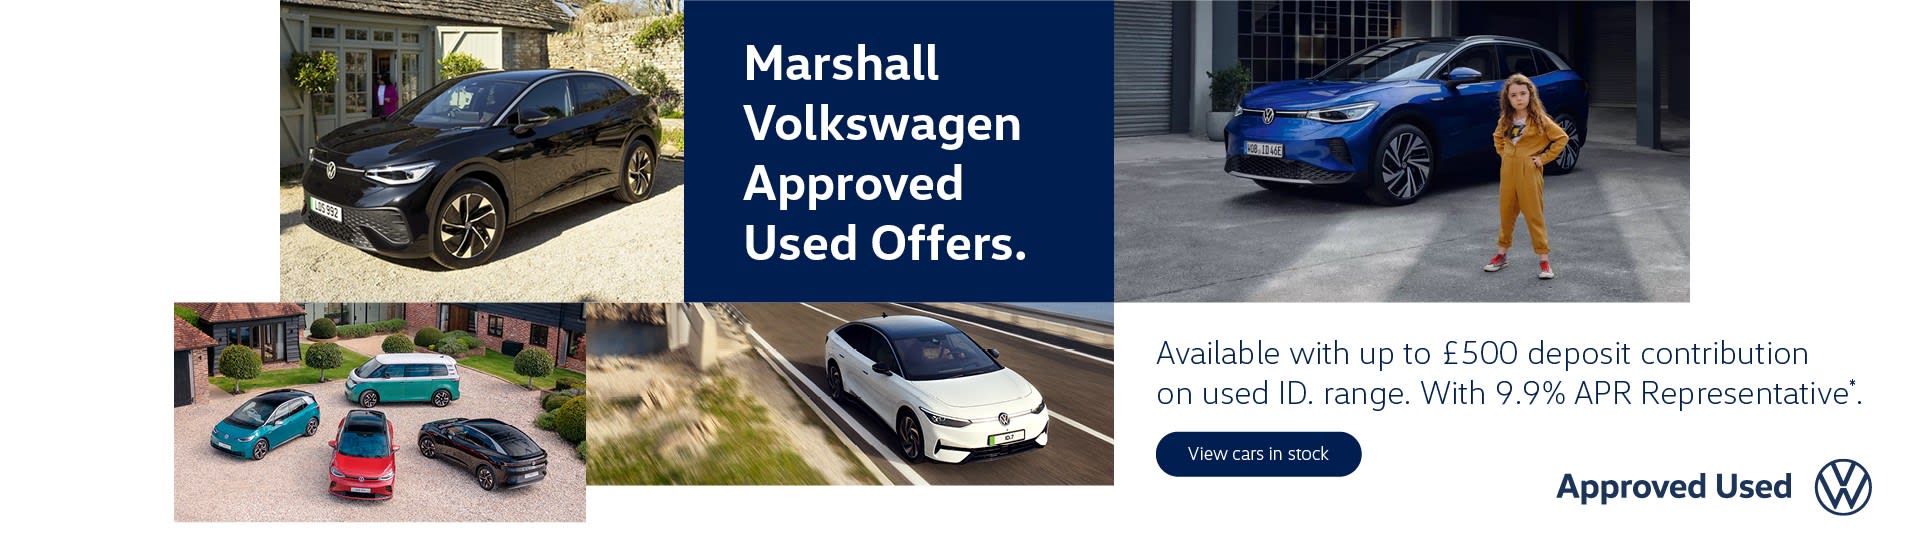 Marshall Volkswagen Approved Used Offers